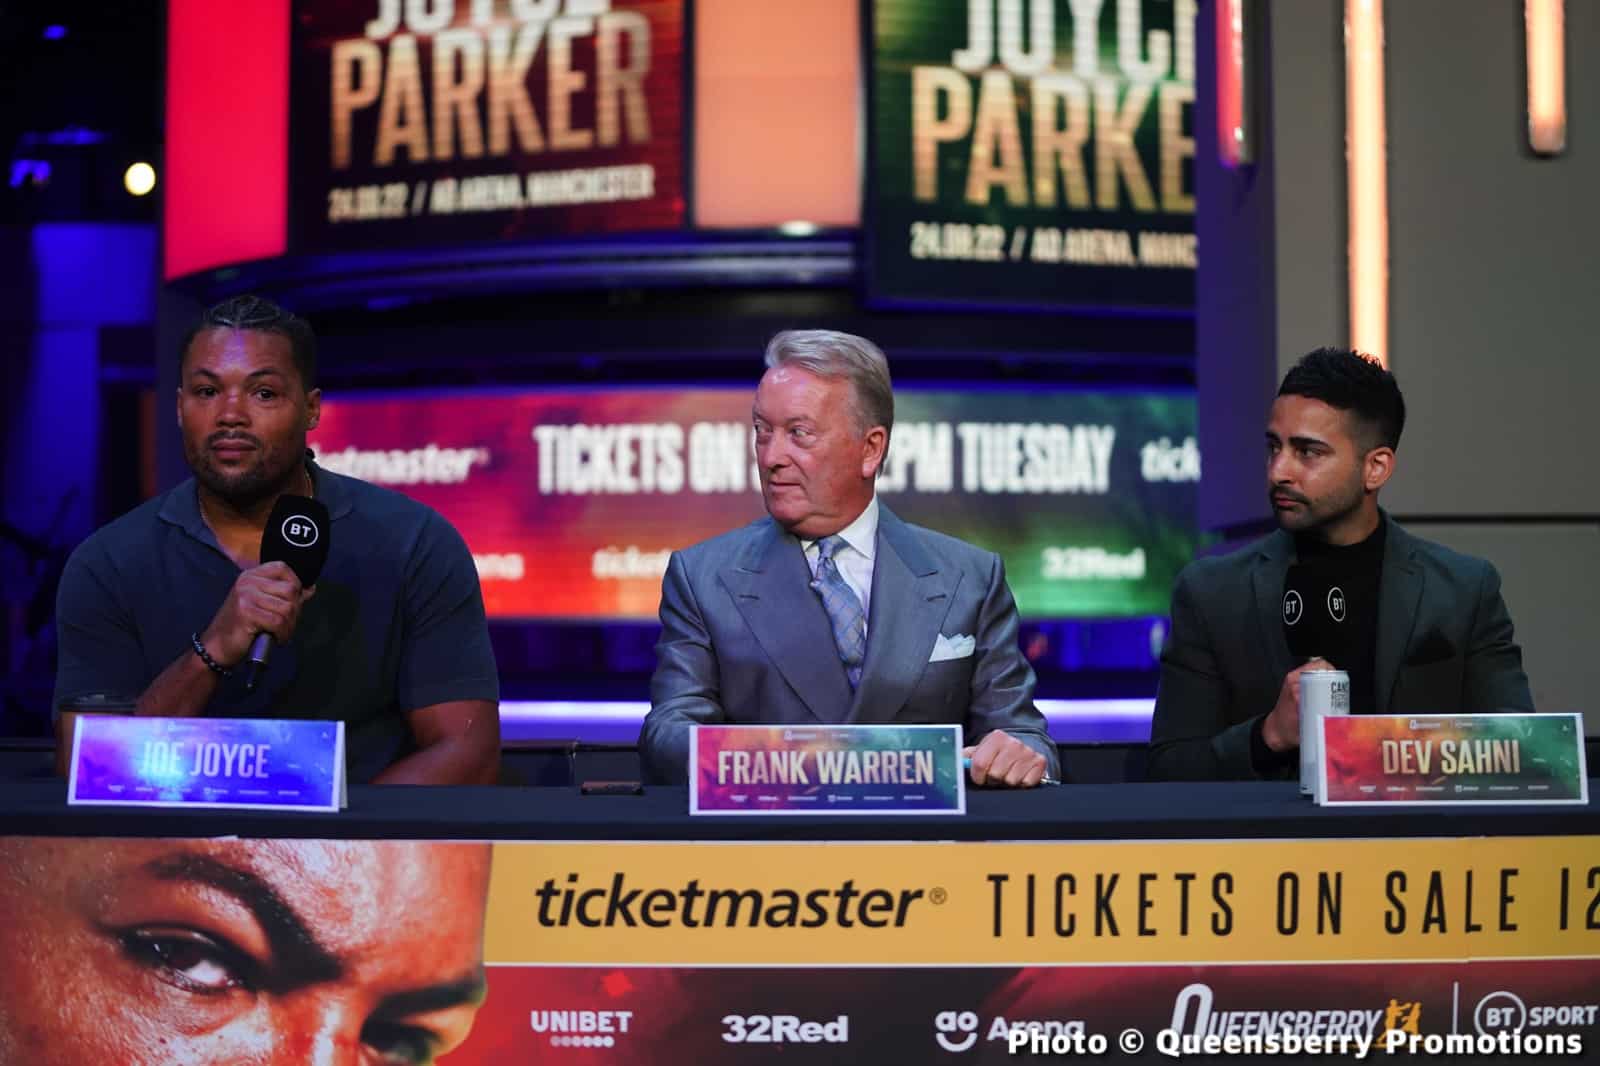 Image: What time is Joyce v Parker this Saturday?